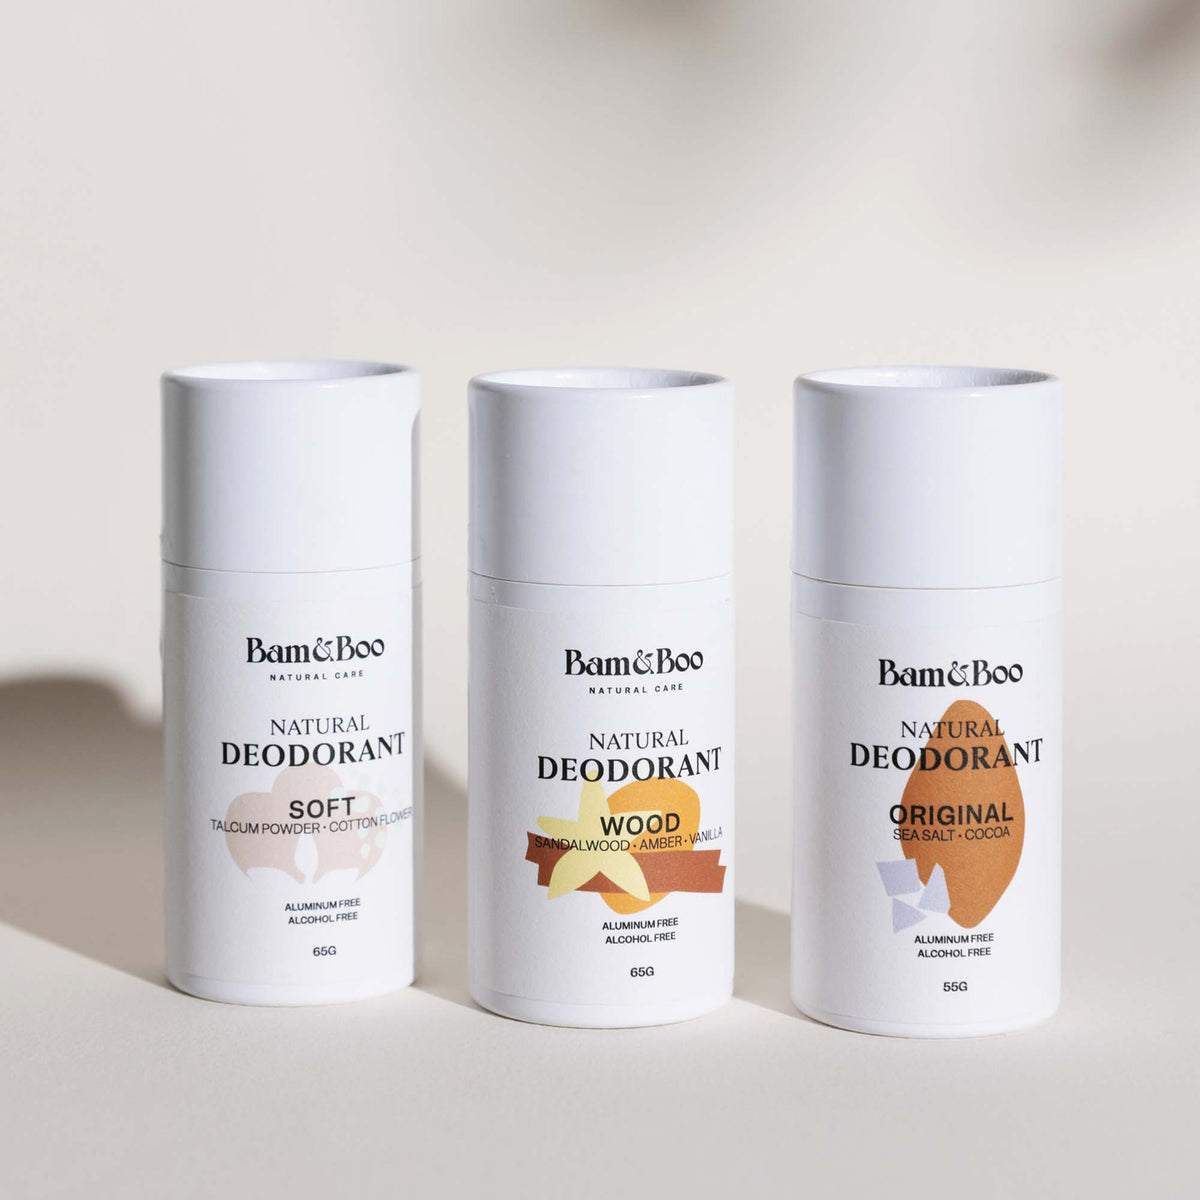 KIT | Deo Trinity - 3 Natural Deodorants - Bam&amp;Boo - Eco-friendly, vegan, sustainable oral and personal care